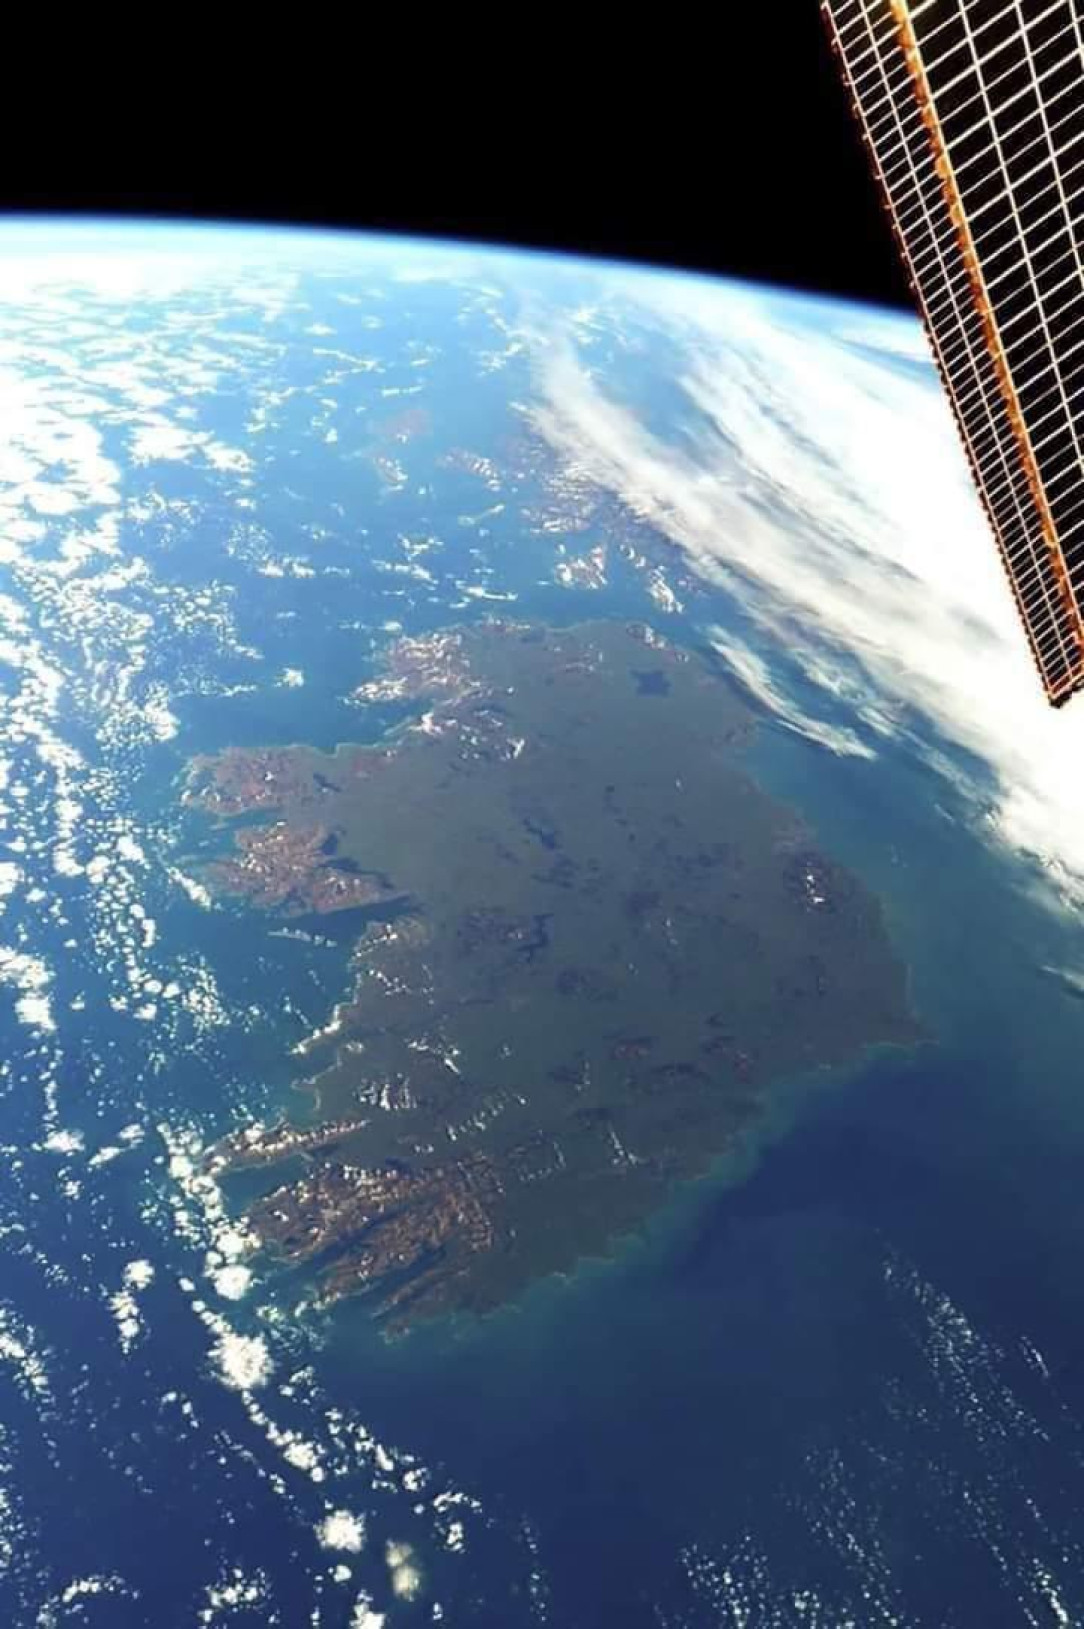 Ireland seen from the International Space Station